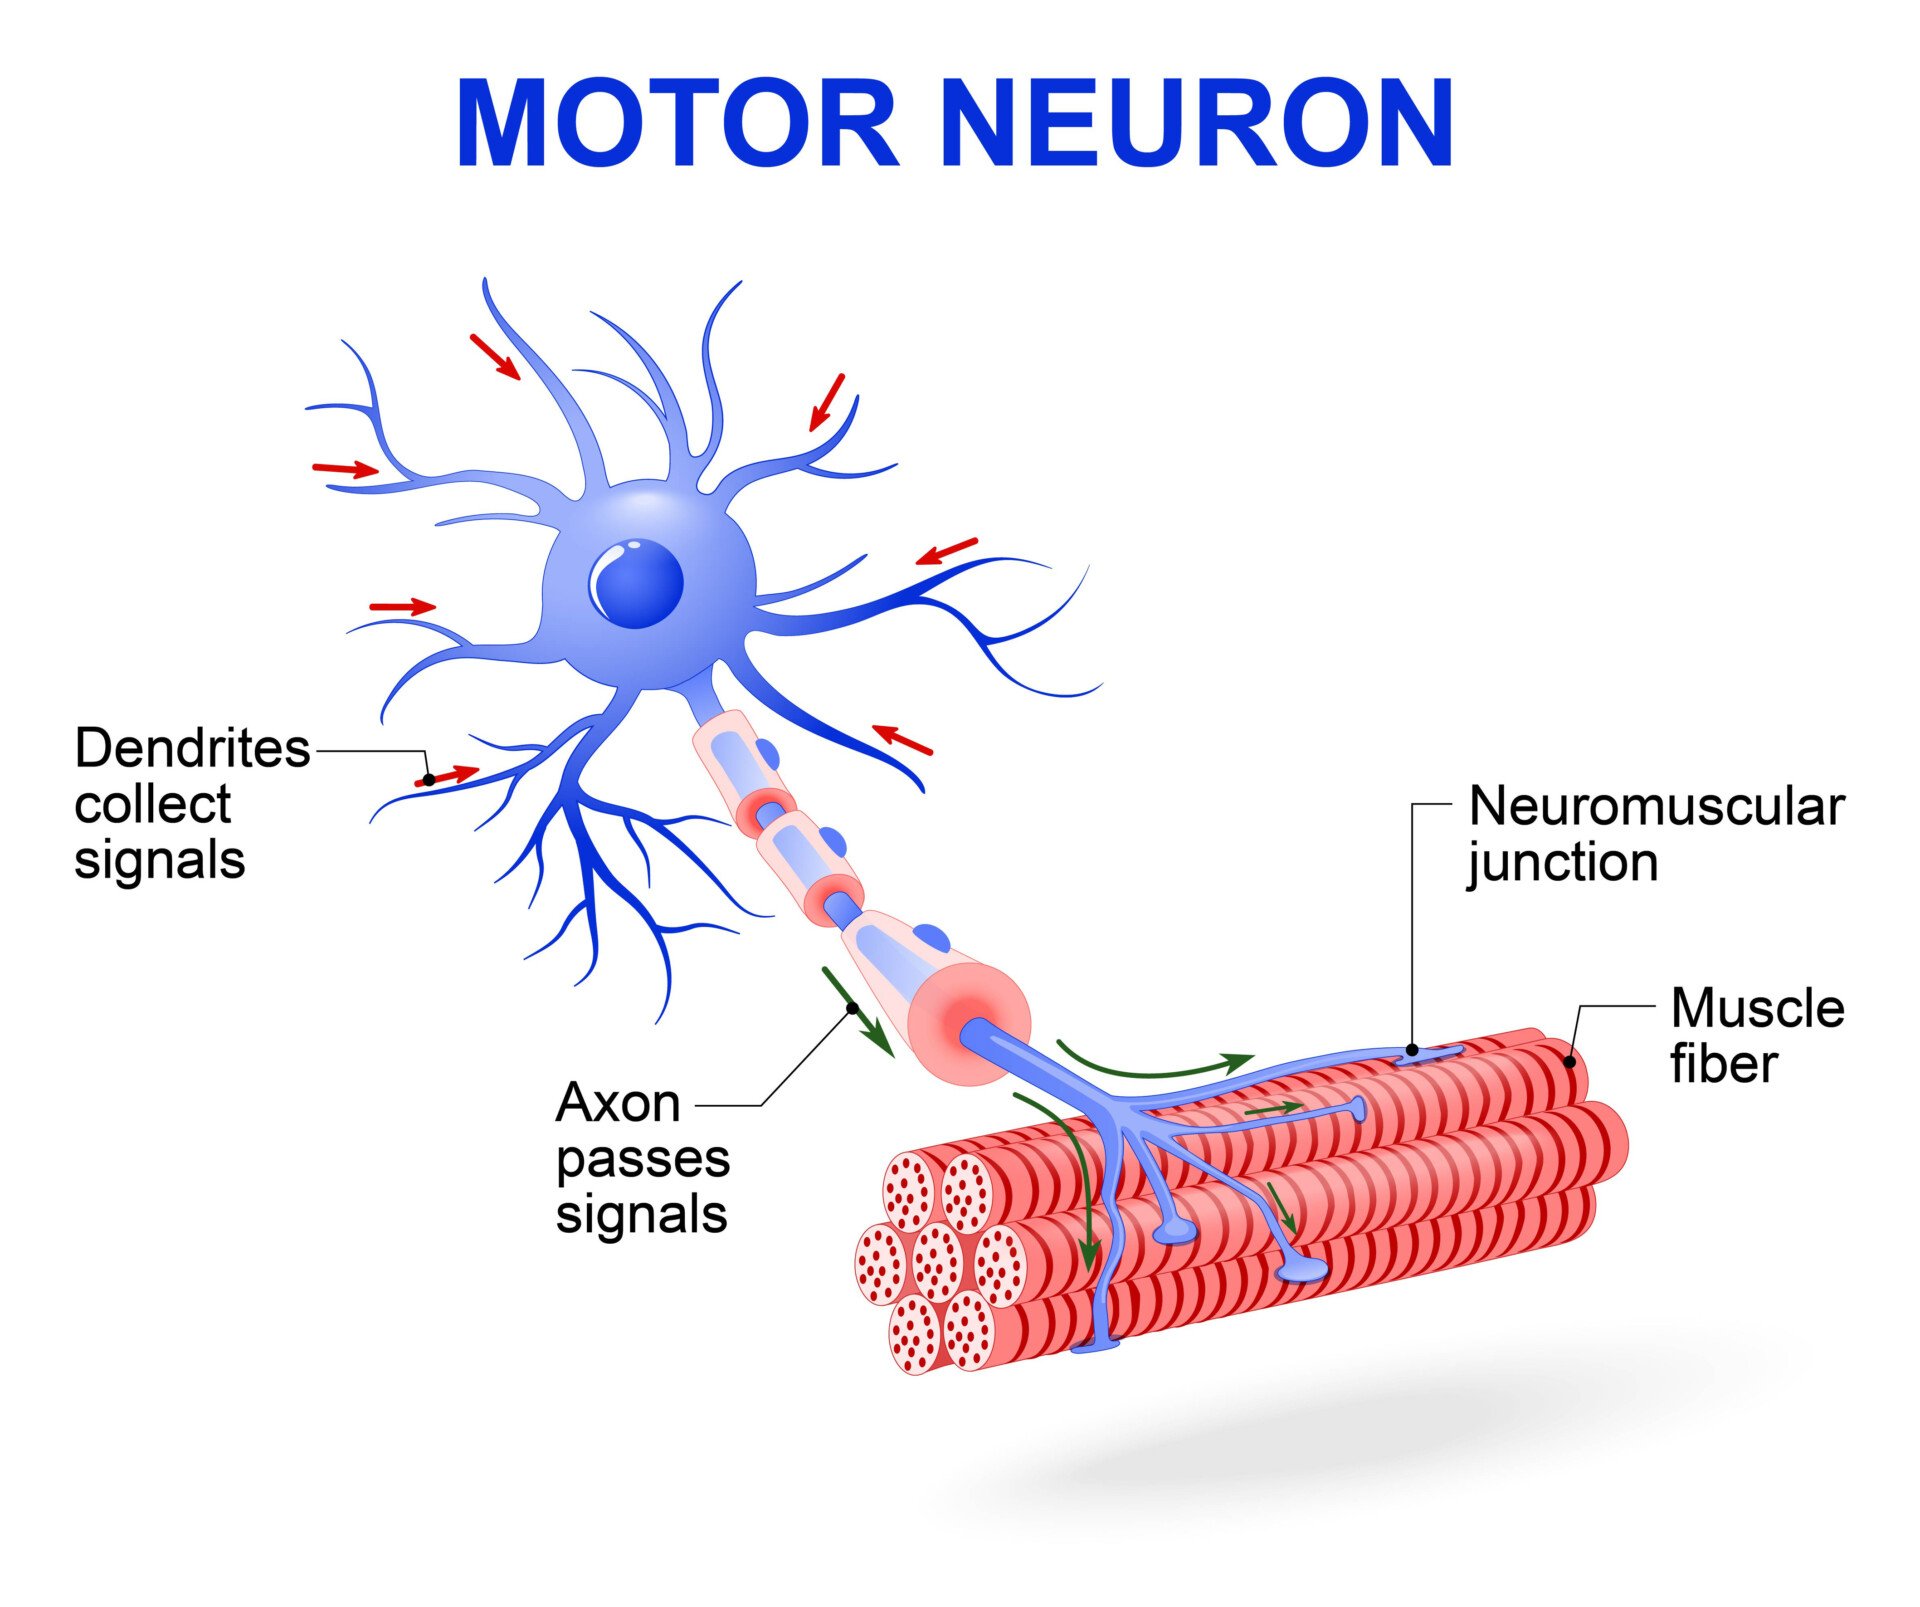 structure of a motor neuron. Includes dendrites, cell body with nucleus, axon, myelin sheath, nodes of Ranvier and muscle fiber